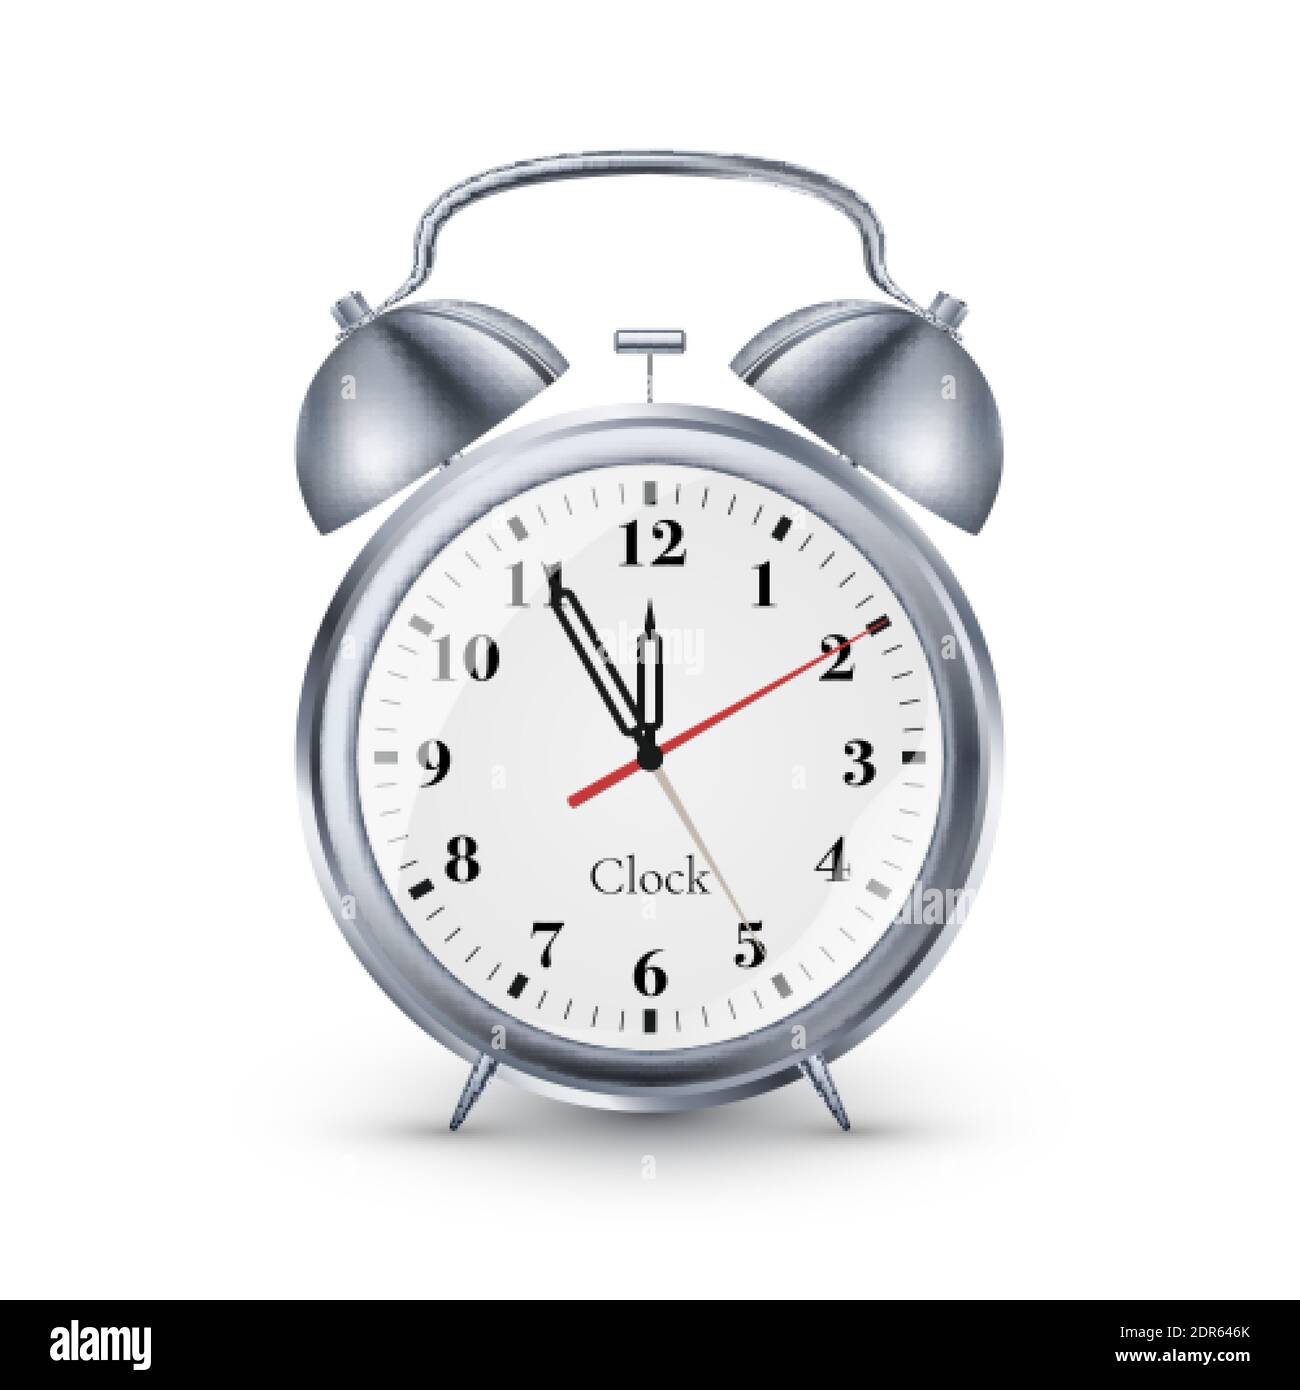 Clock Stock Vector Images - Alamy